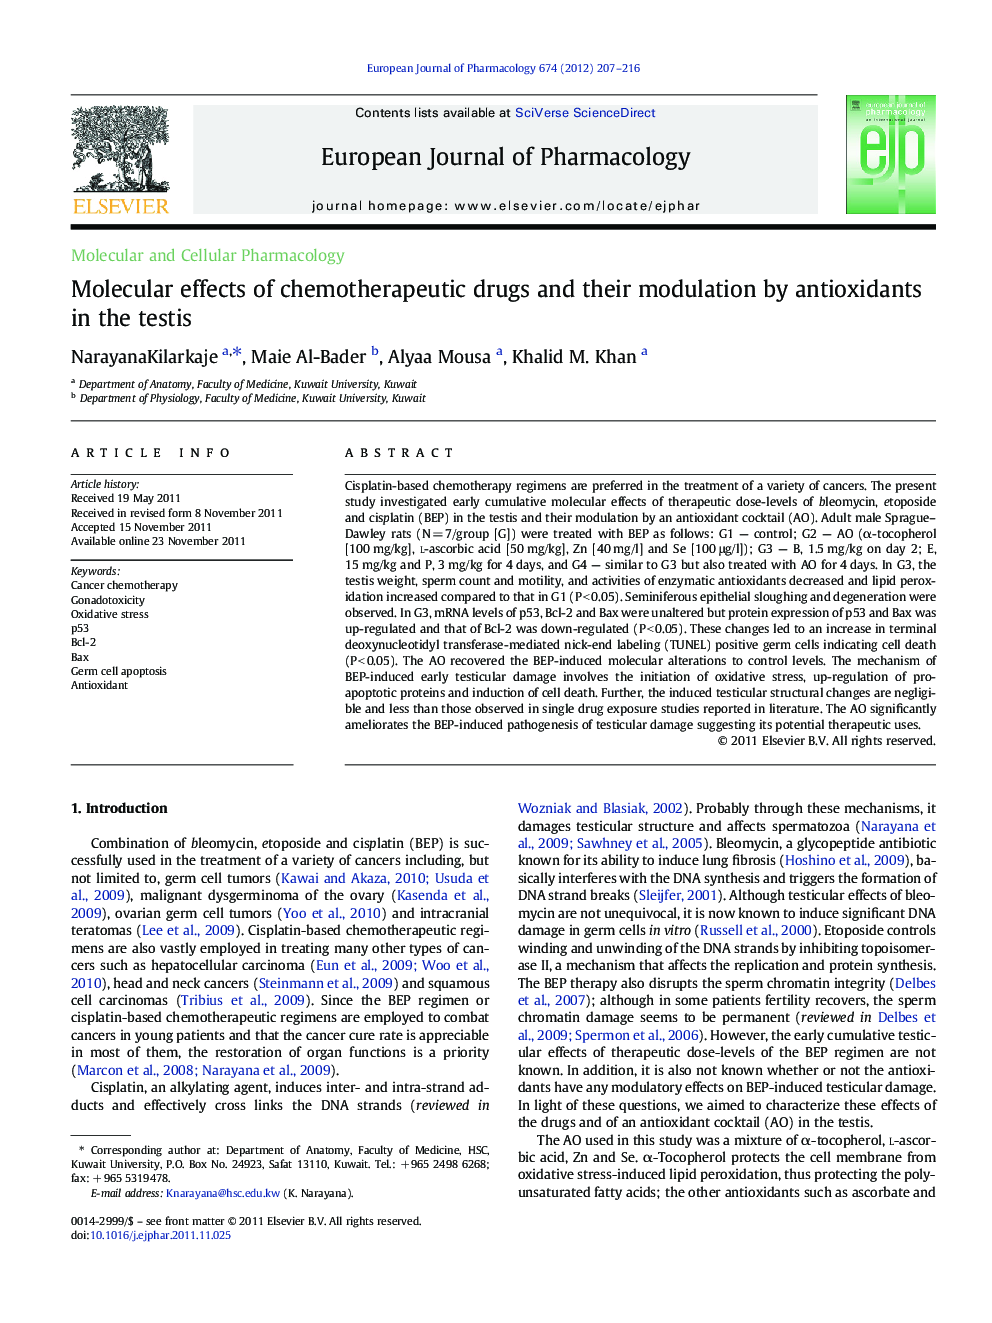 Molecular and Cellular PharmacologyMolecular effects of chemotherapeutic drugs and their modulation by antioxidants in the testis